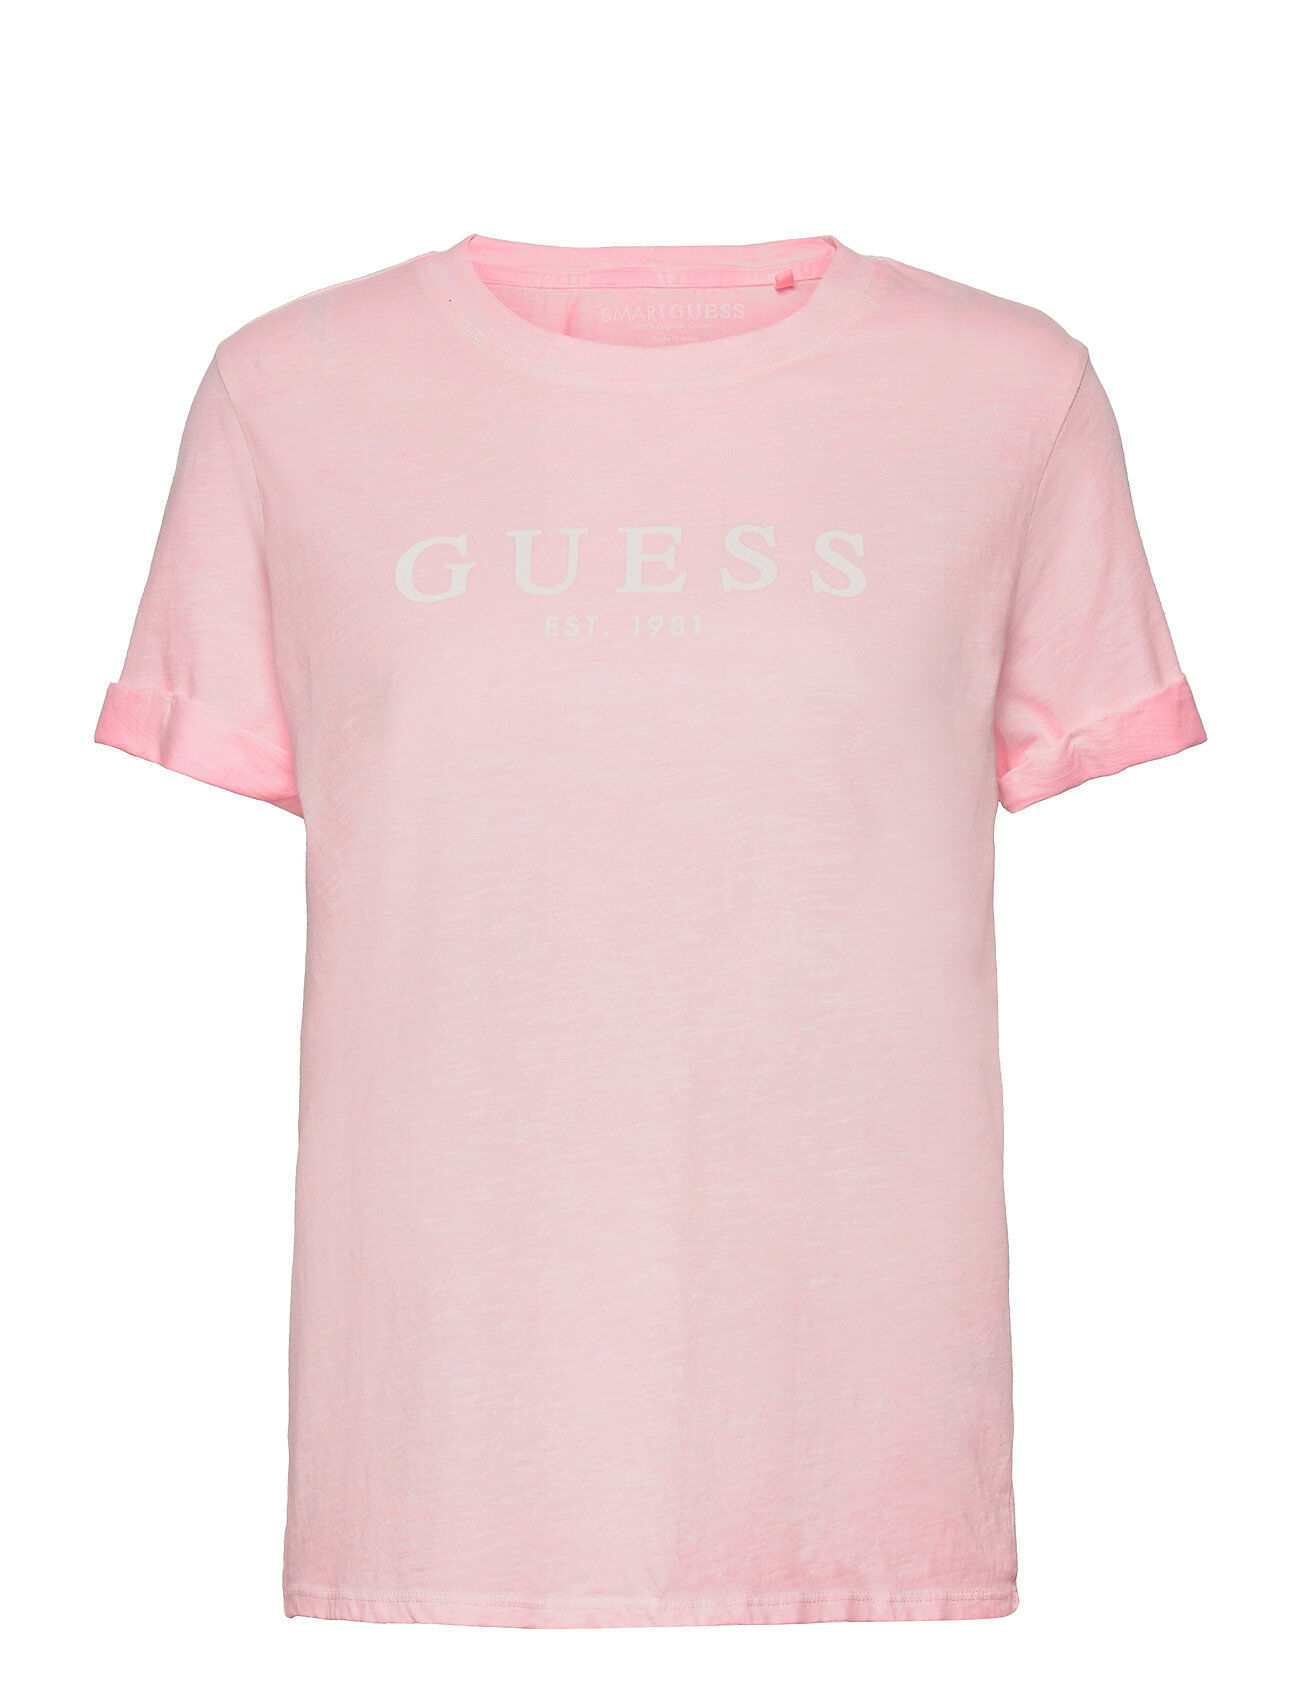 GUESS Jeans Es Ss Guess 1981 Roll Cuff Tee T-shirts & Tops Short-sleeved Rosa GUESS Jeans